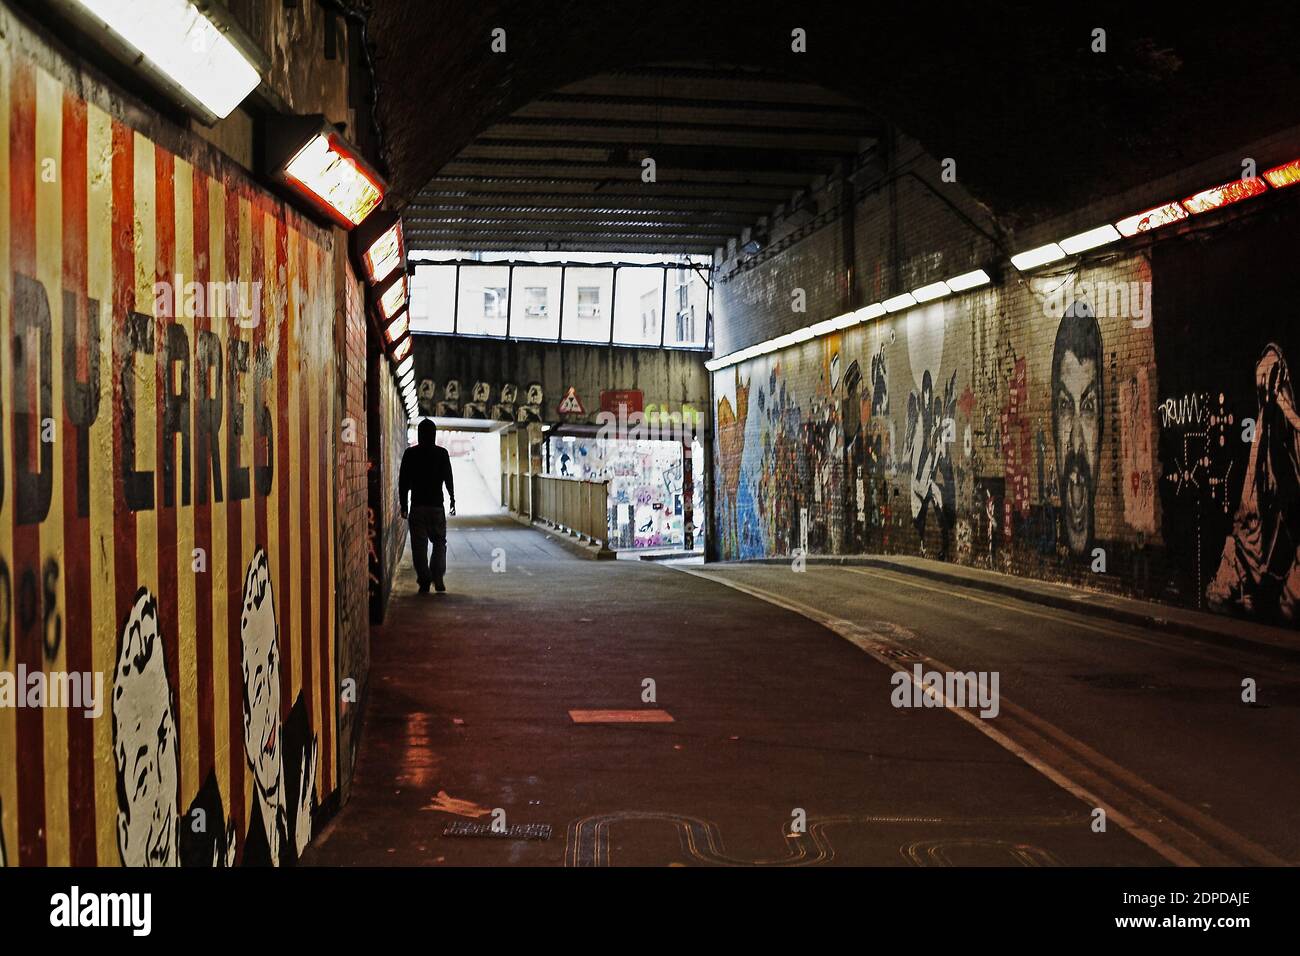 GREAT BRITAIN / London/ Street Art / A subway painted by stencil artists at a giant new exhibition space created by famed graffiti artist Banksy,in Lo Stock Photo